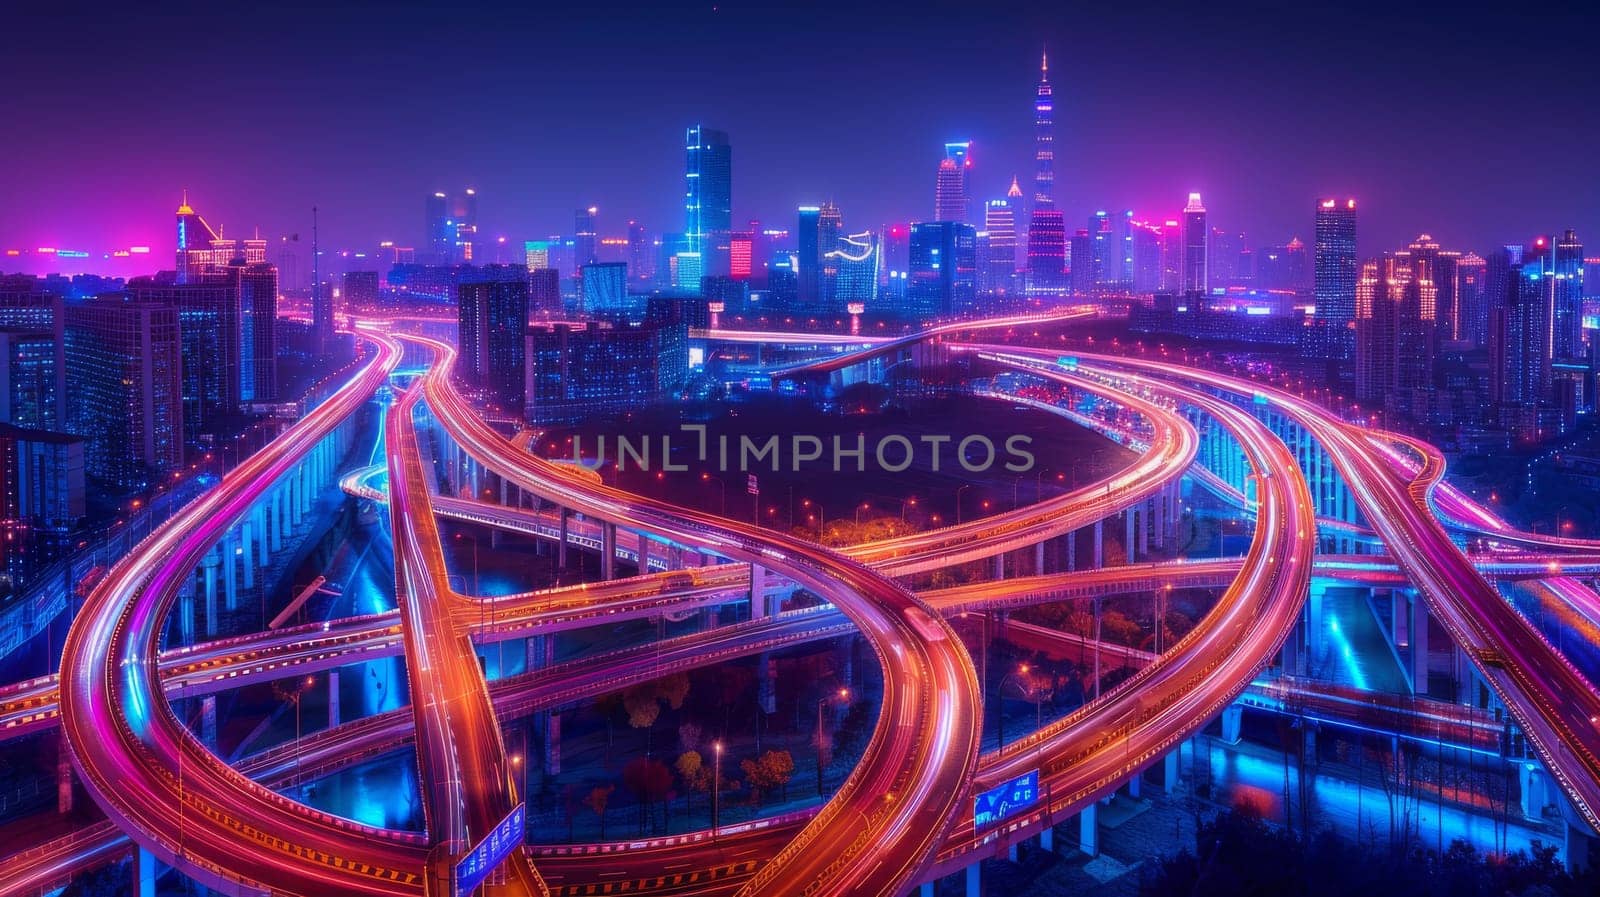 A city at night with a lot of traffic and a lot of lights. The lights are neon and the city is very busy